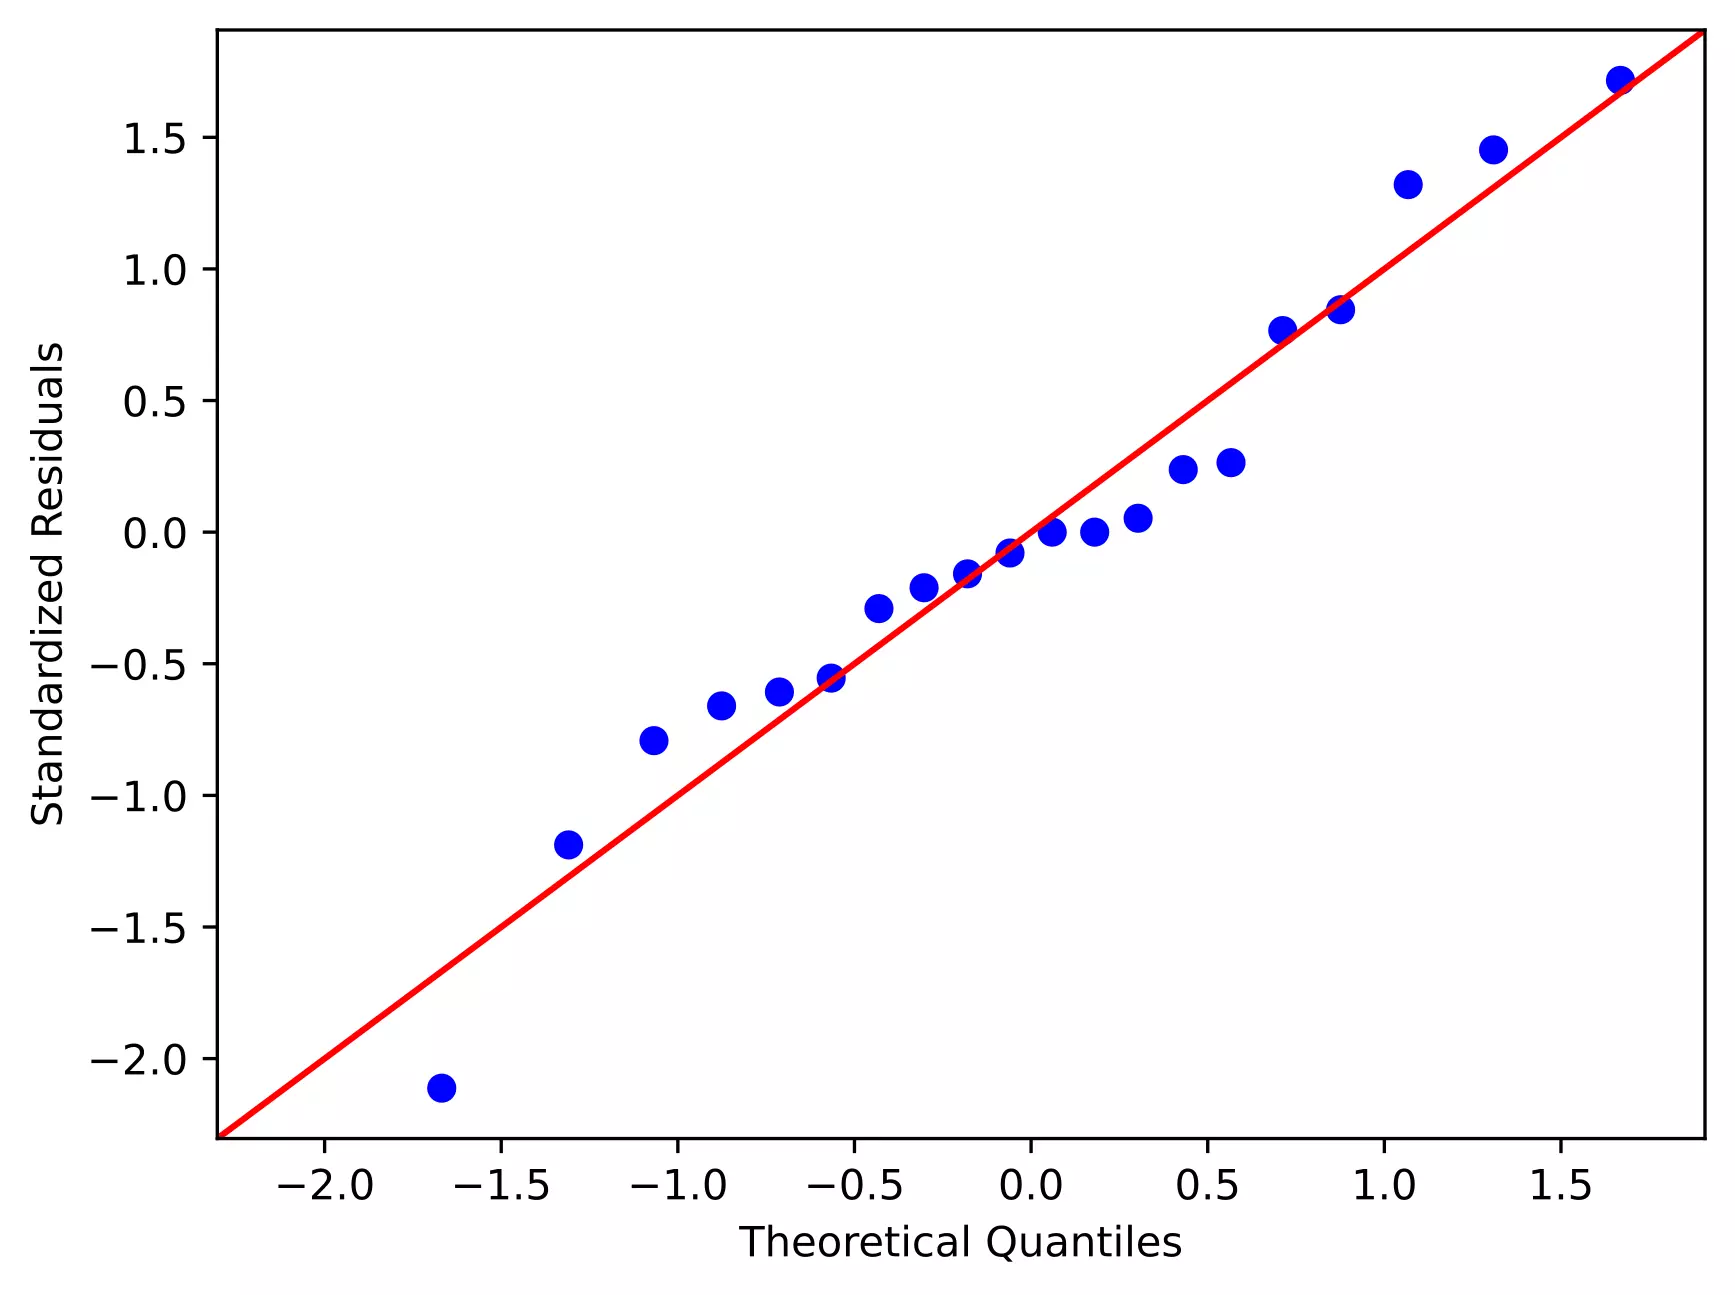 QQ plot for checking assumption of normality